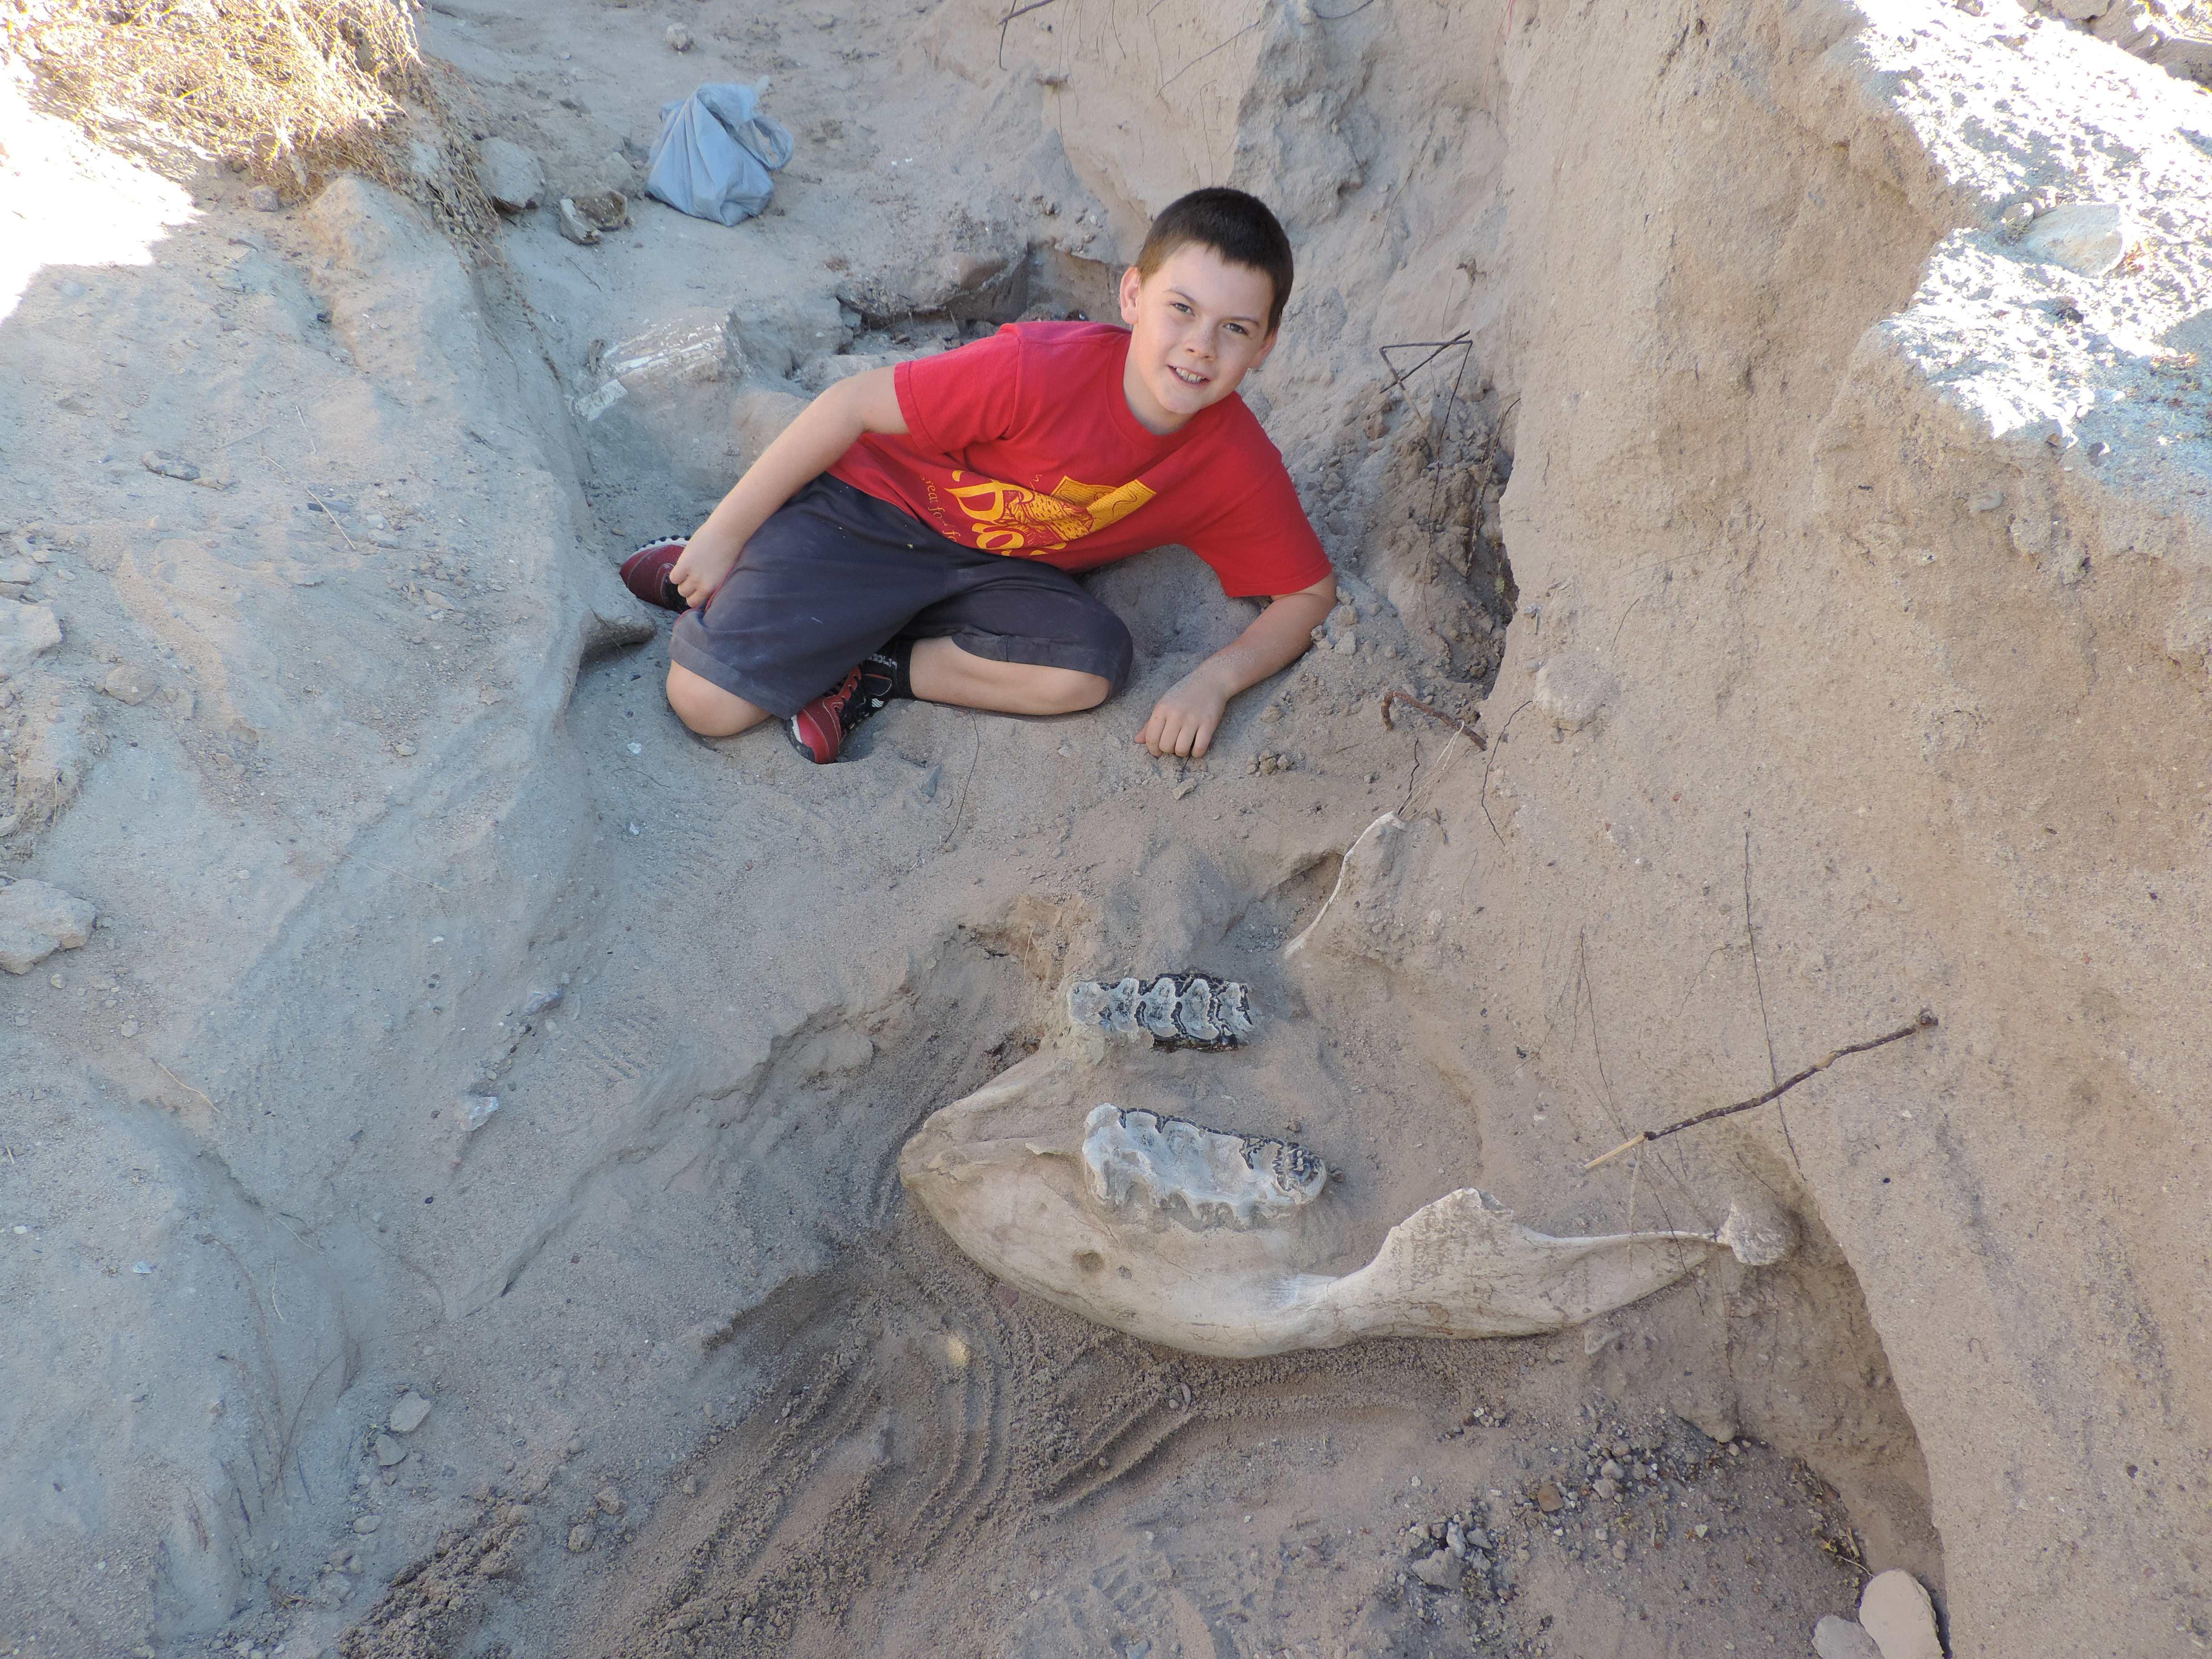 Boy trips, falls and discovers million-year-old fossil